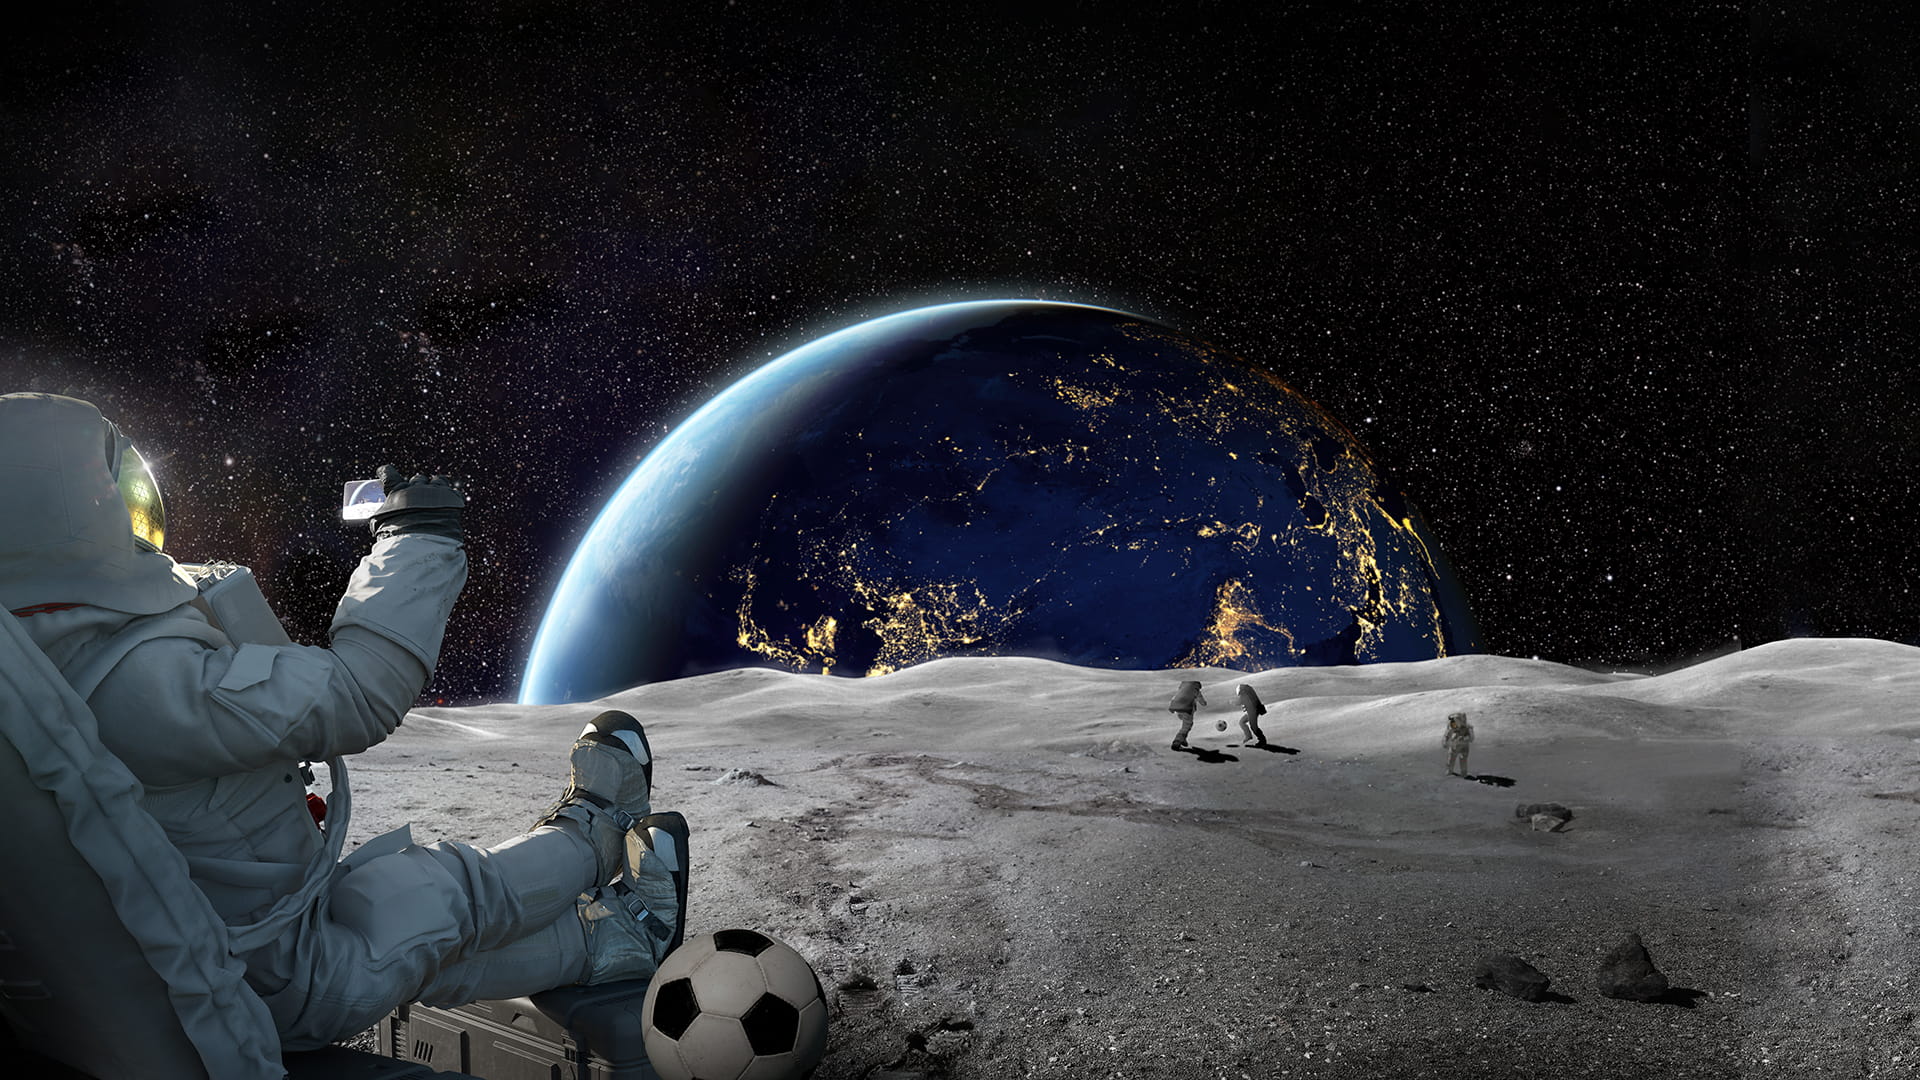 A computer illustration of astronauts on the moon playing soccer. Earth is visible in the background.